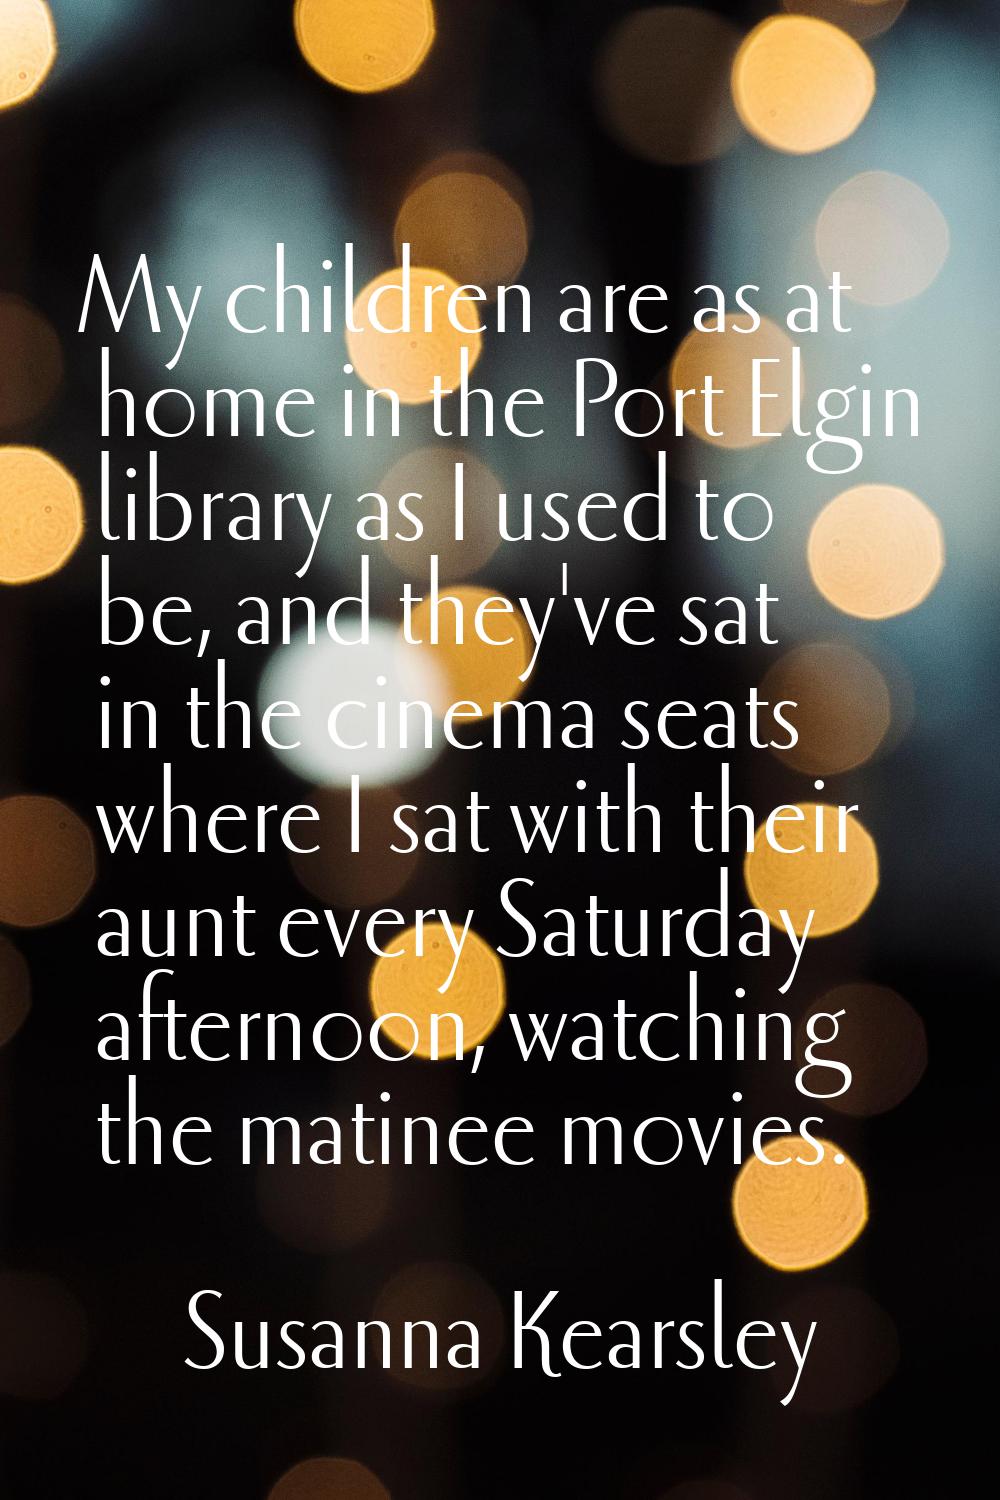 My children are as at home in the Port Elgin library as I used to be, and they've sat in the cinema